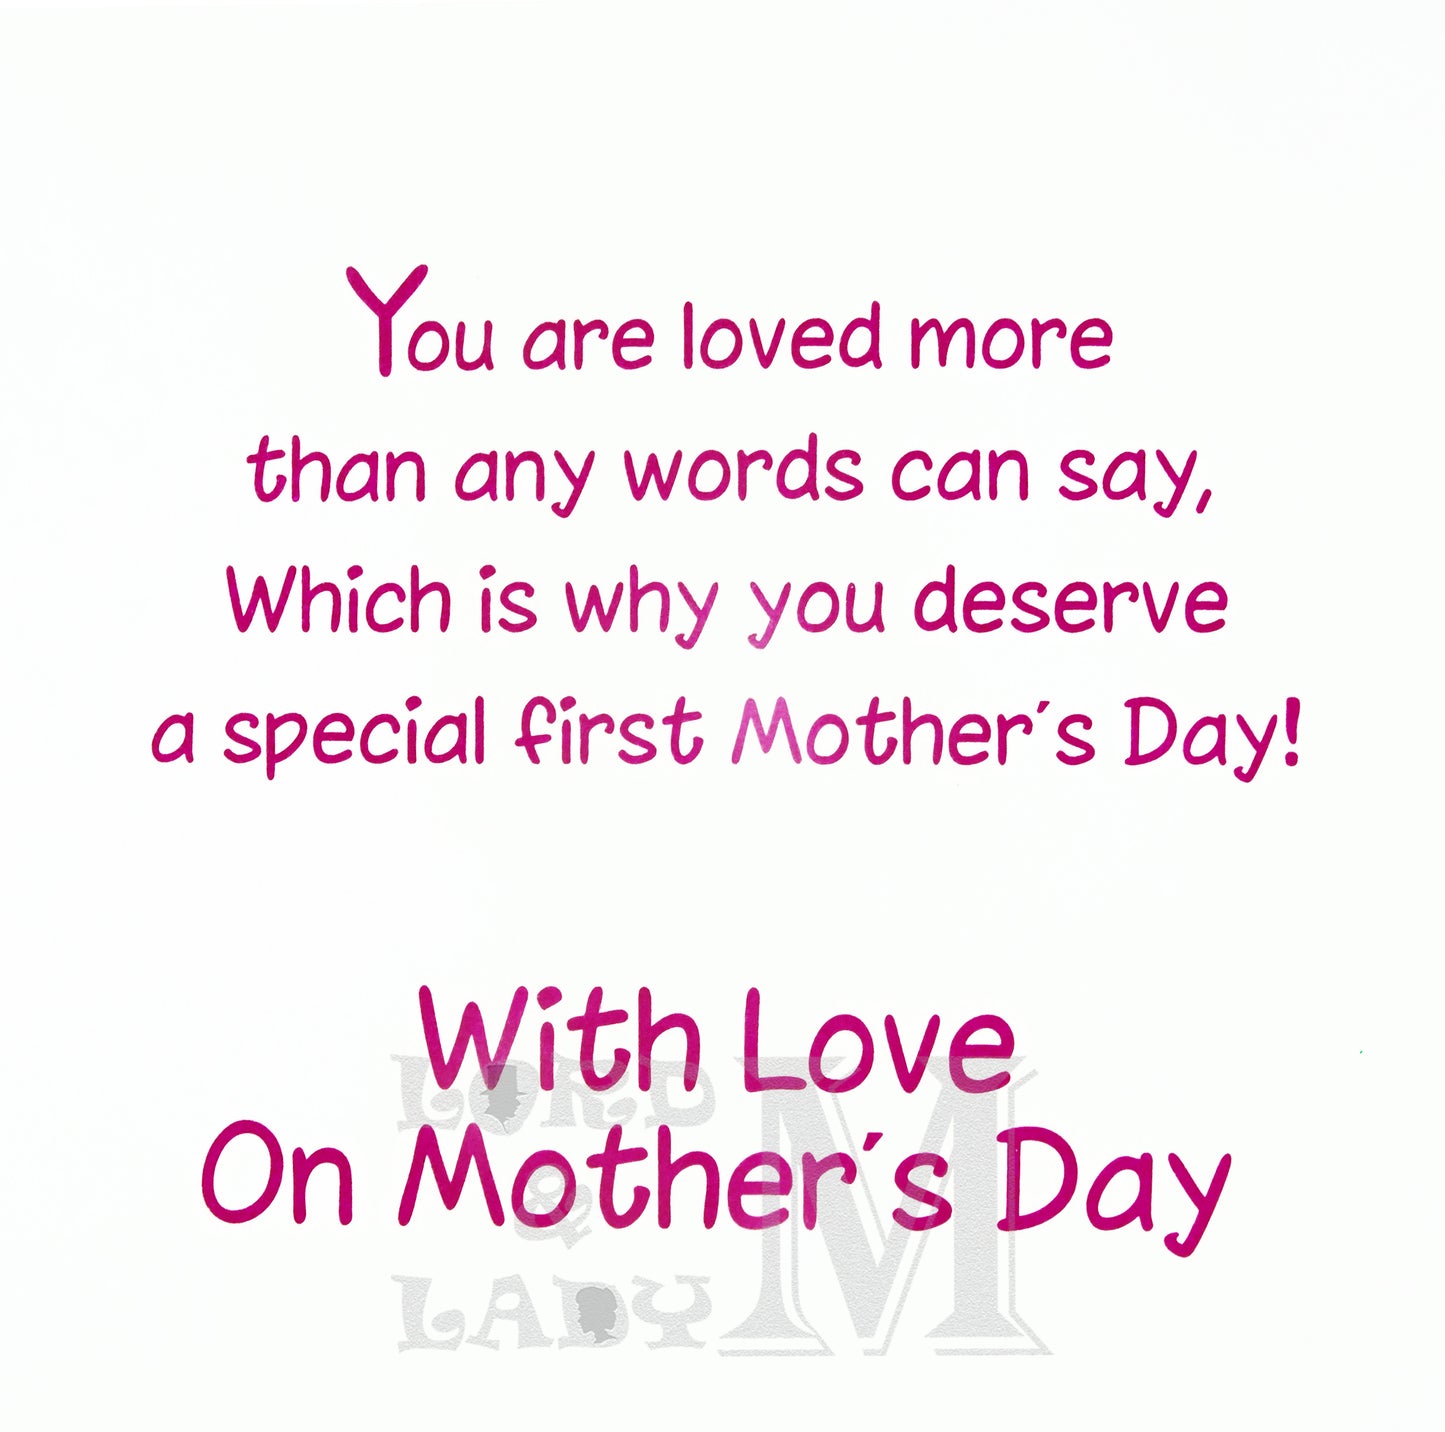 19cm - On Your 1st Mother's Day With Special - BGC